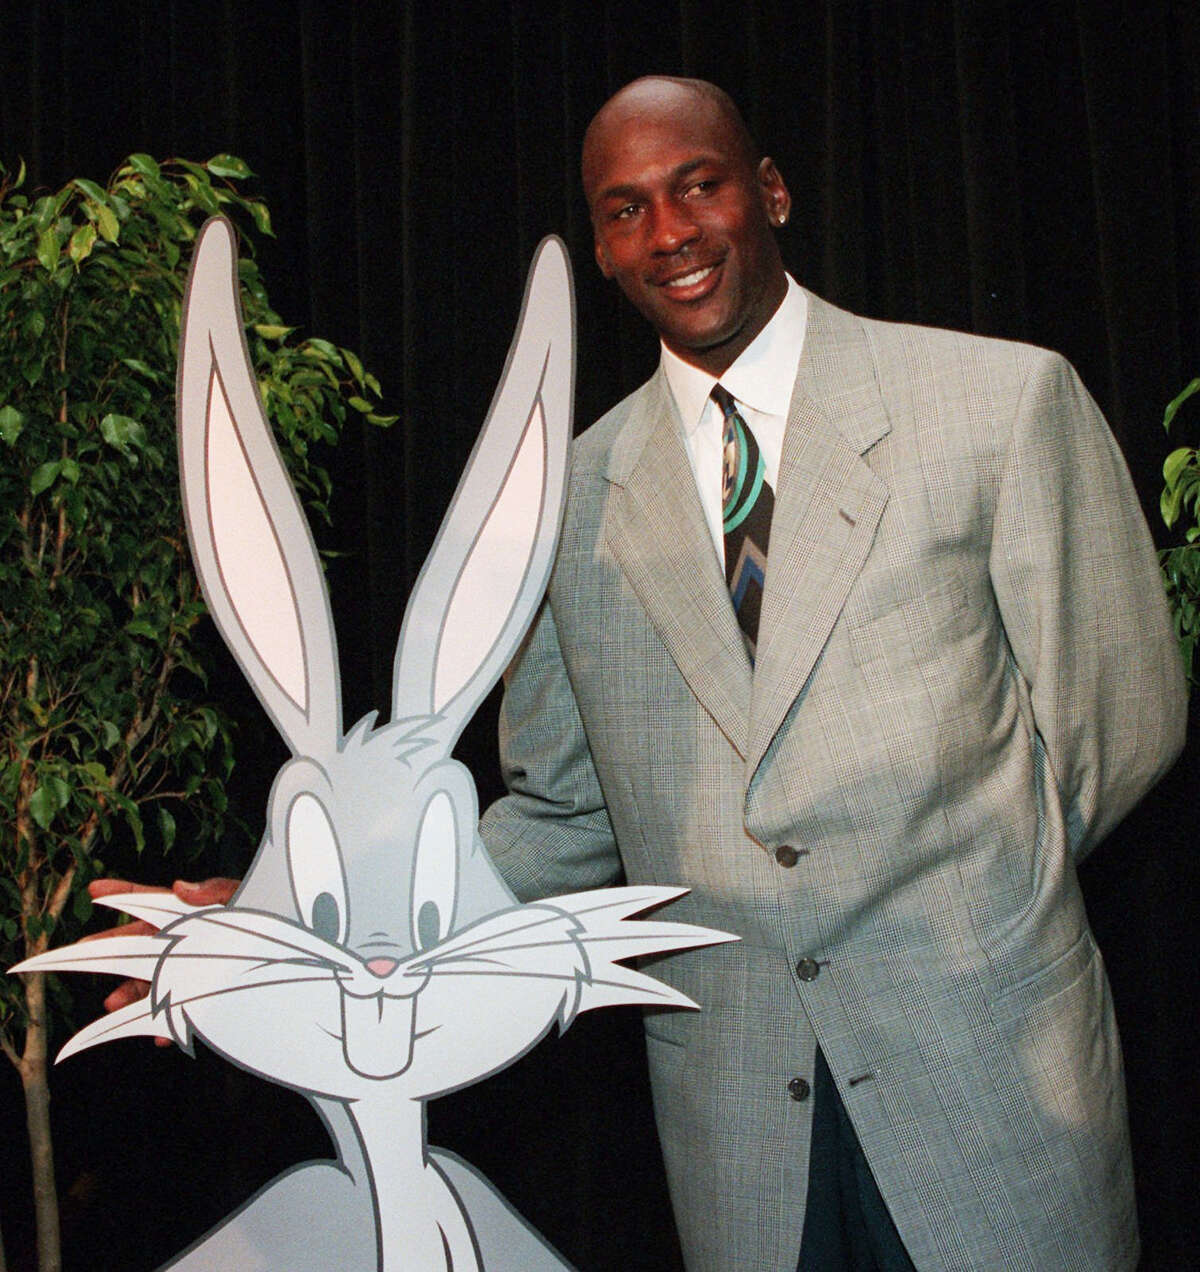 In this undated 1995 photo, Michael Jordan is seen with cartoon character Bugs Bunny during a news conference for “Space Jam.” Fathom Events and Waner Bros. say the film that combines live action and animation will return to theaters on Nov. 13, 2016 to mark the 20th anniversary of its release.